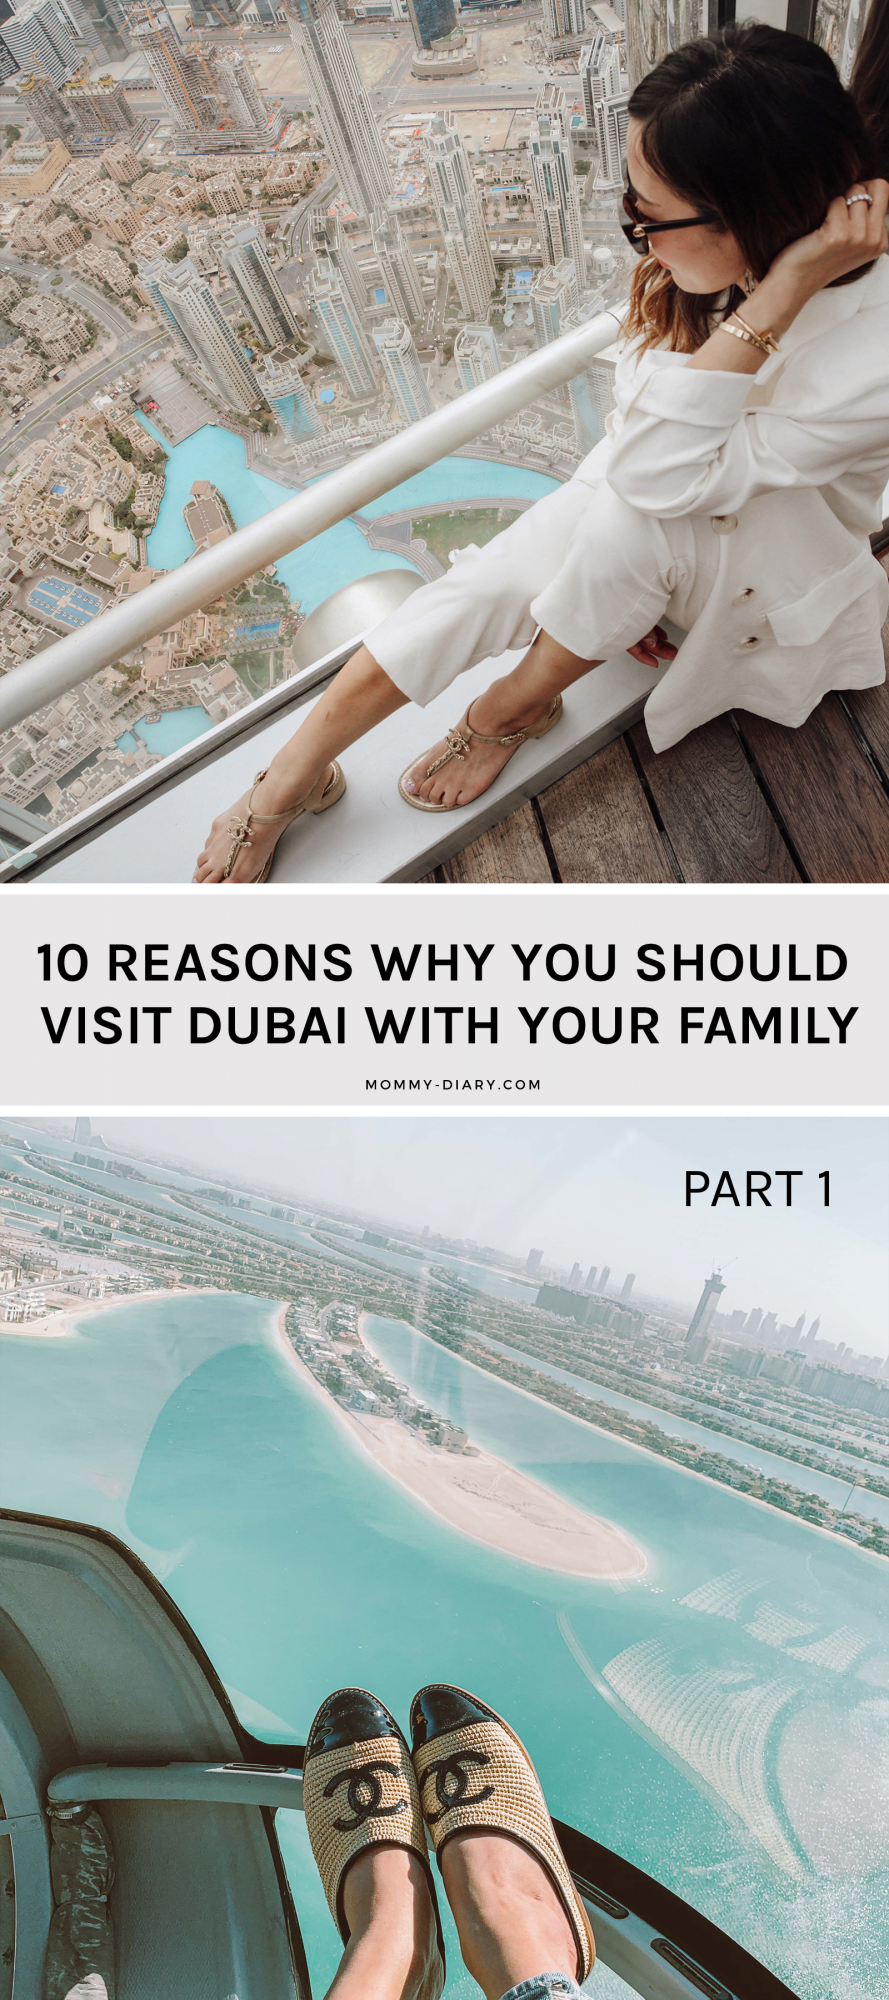 10 reasons why you should visit Dubai for your next family vacation